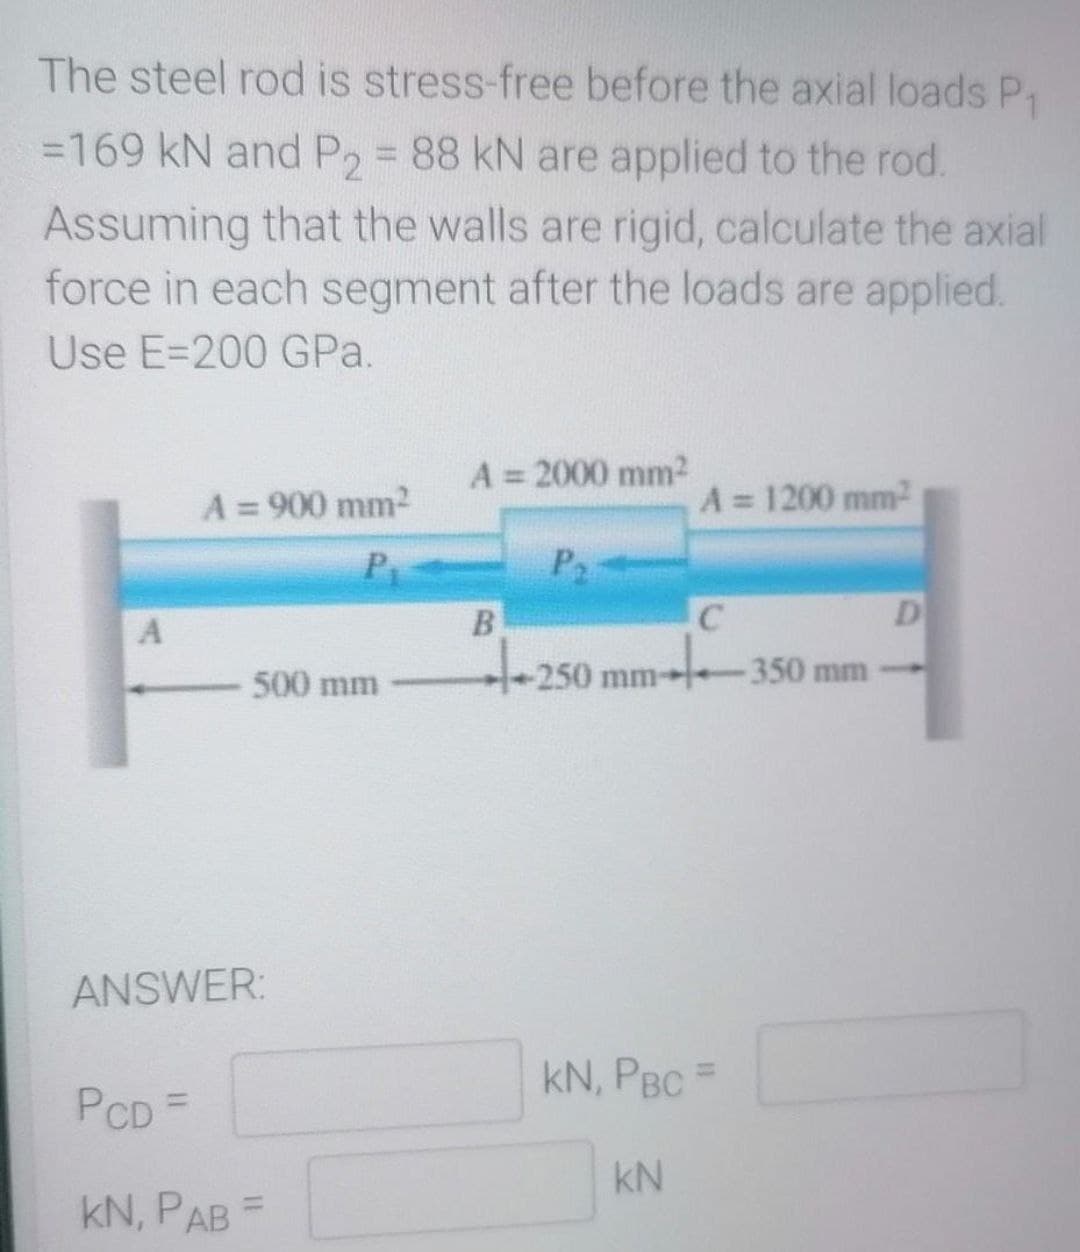 The steel rod is stress-free before the axial loads P₁
=169 kN and P₂ = 88 kN are applied to the rod.
Assuming that the walls are rigid, calculate the axial
force in each segment after the loads are applied.
Use E-200 GPa.
A = 2000 mm²
A = 900 mm²
A = 1200 mm²
P
P₂
B
C
D
+25
-250
500 mm
-350 mm
A
ANSWER:
PCD =
KN, PAB
=
mm
KN, PBC =
KN